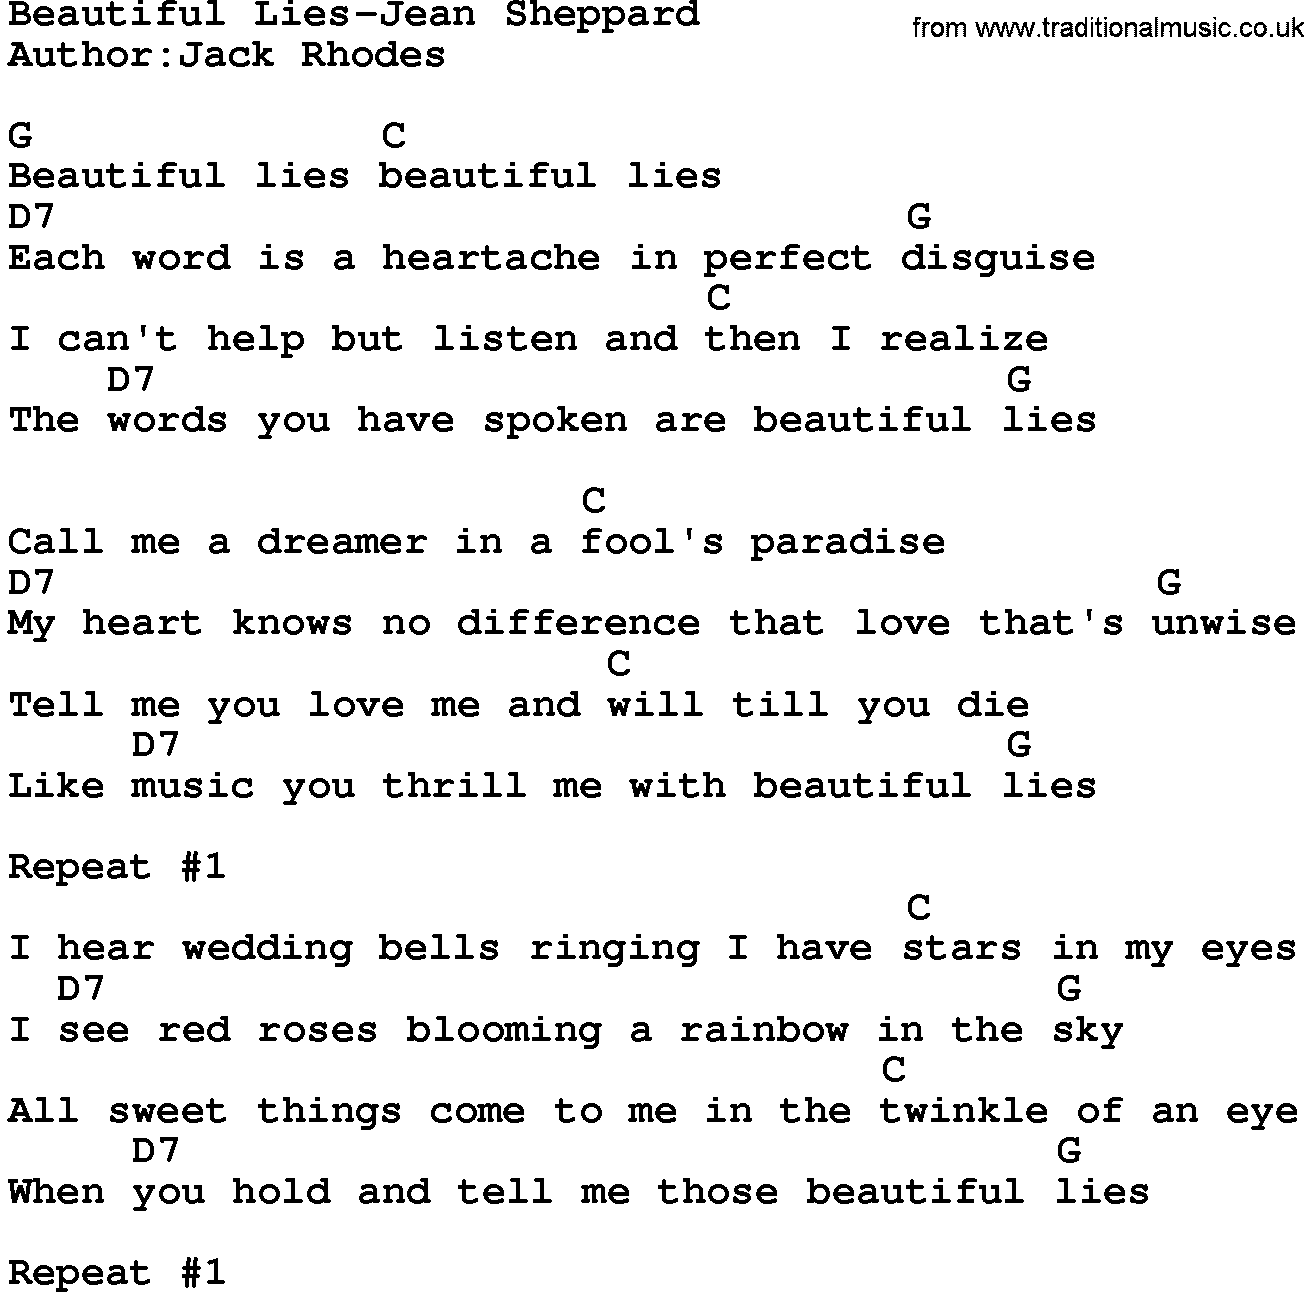 Country music song: Beautiful Lies-Jean Sheppard lyrics and chords